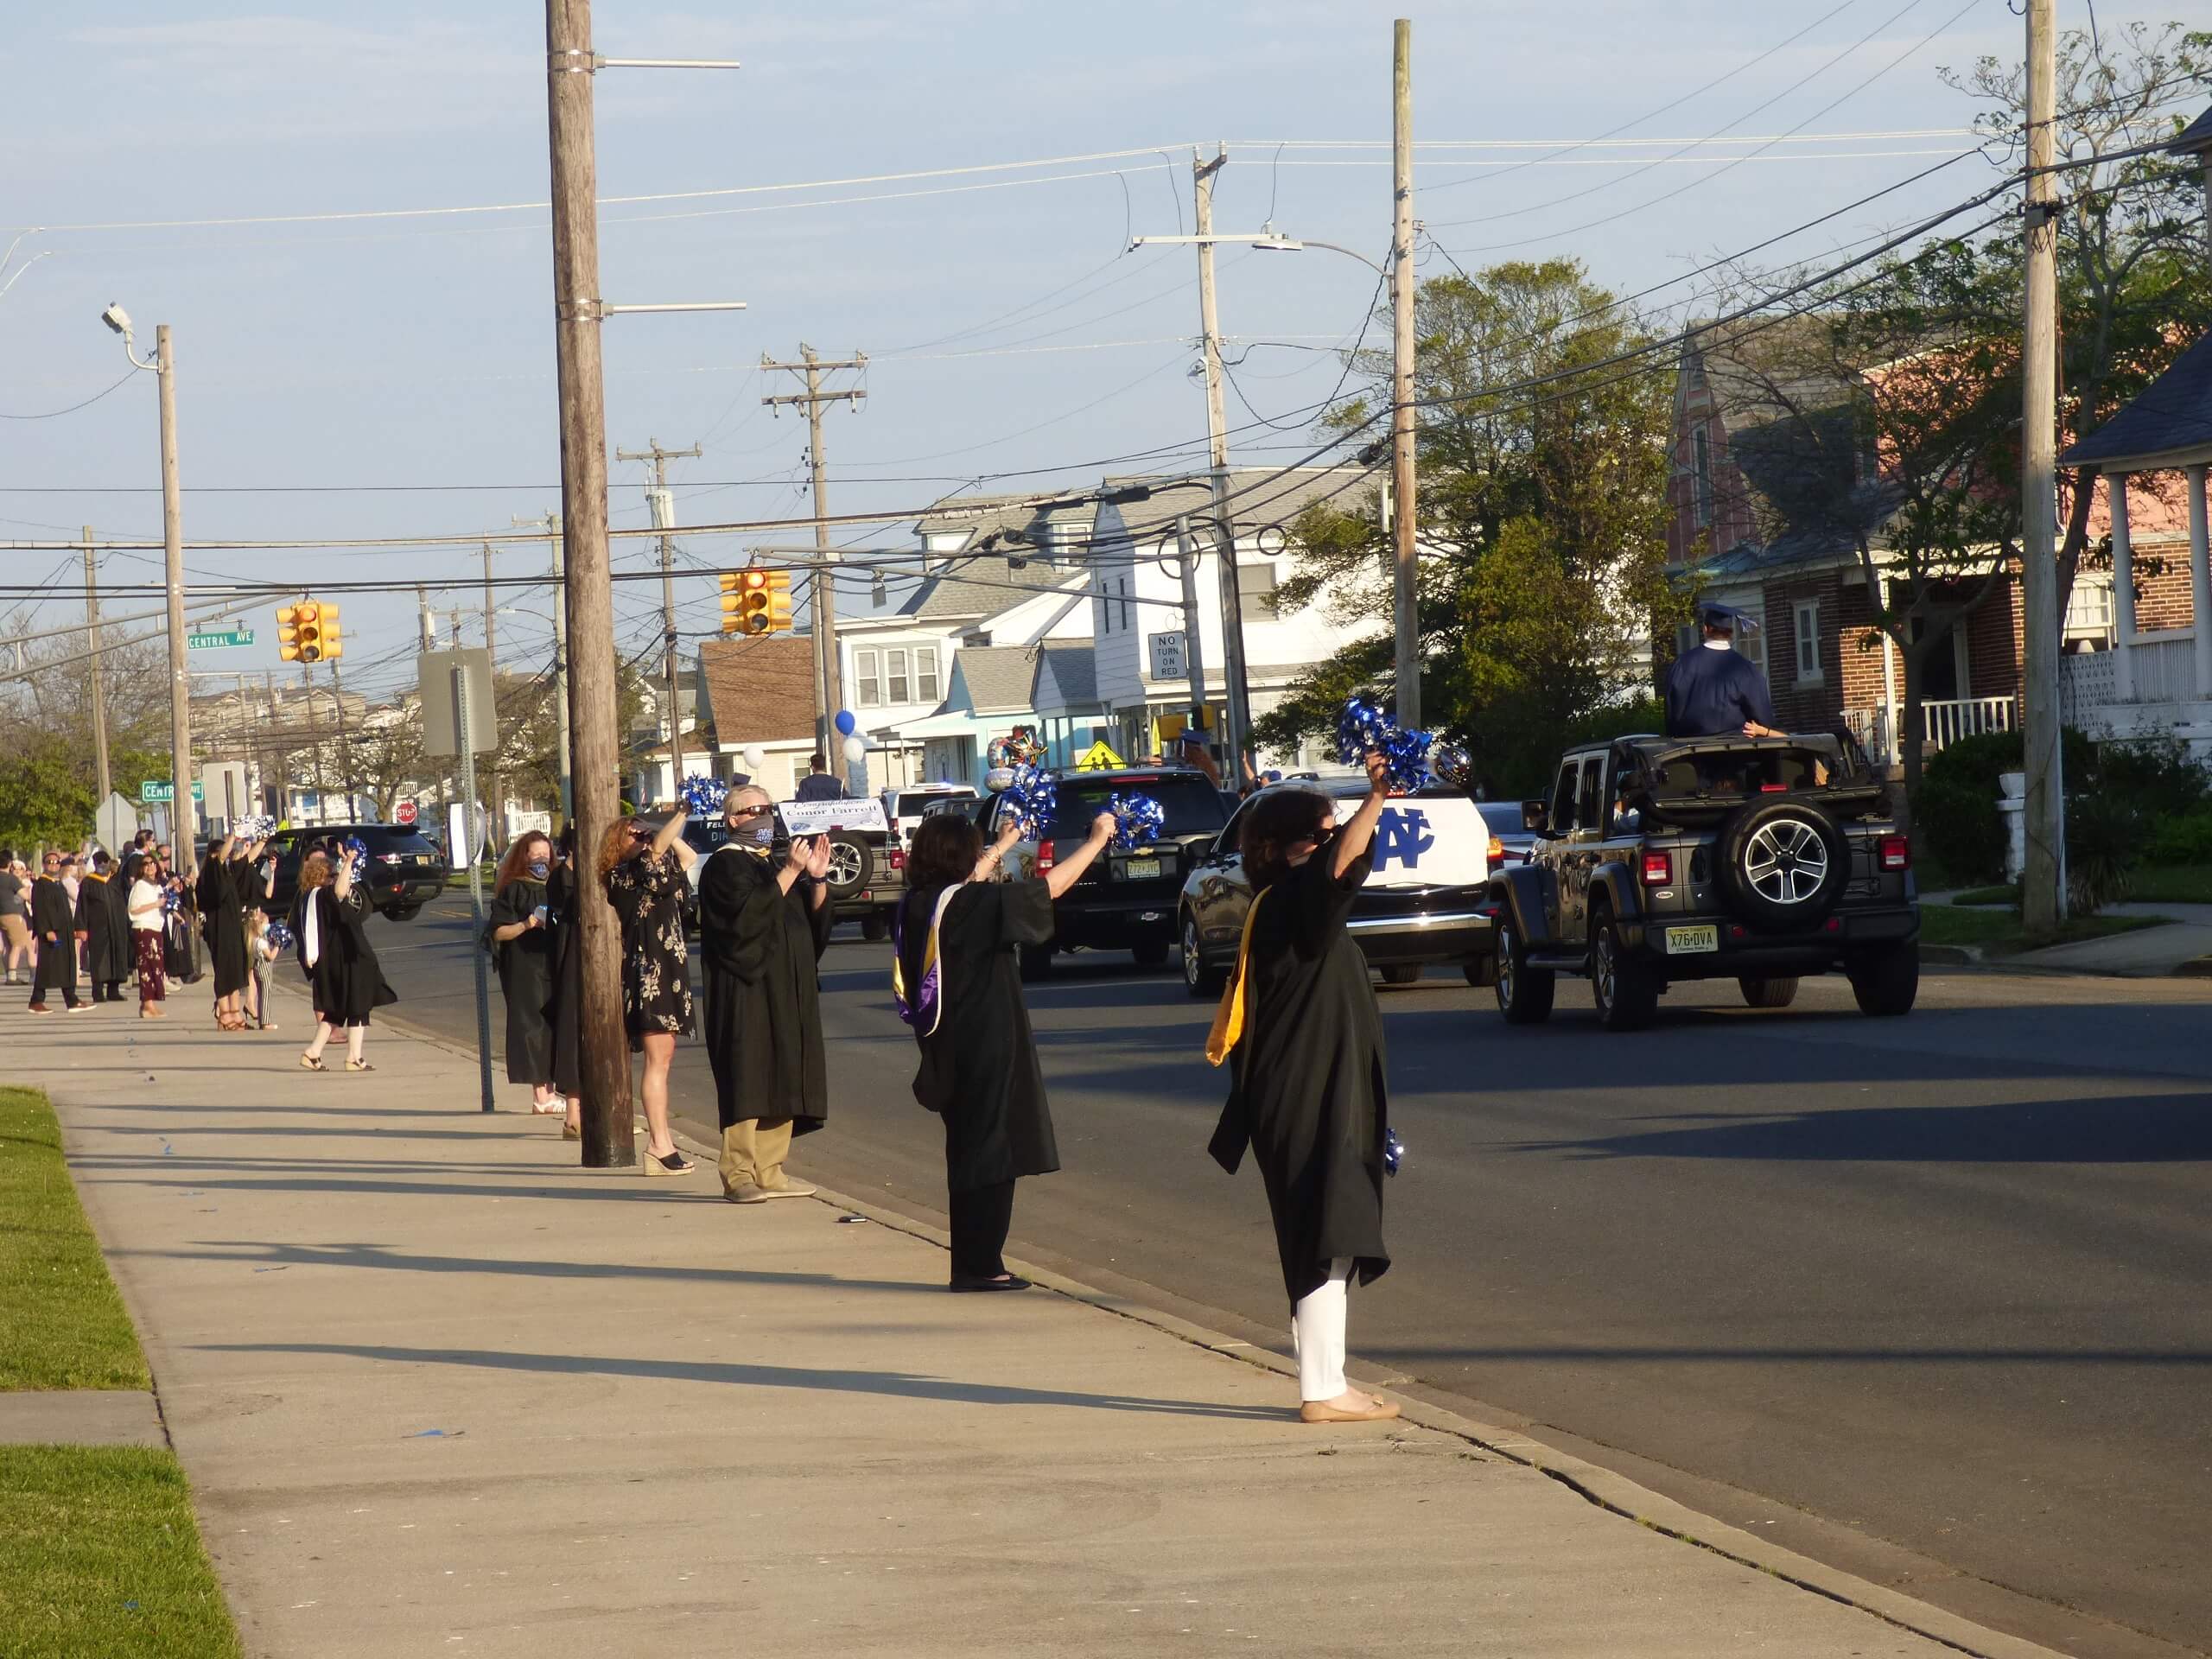 Wildwood Catholic faculty lined 16th Avenue in caps and gowns to congratulate the class of 2020 as they drove by the school. The graduation ceremony was held as a drive-by as in-person ceremonies are banned due to concerns over the spread of coronavirus.